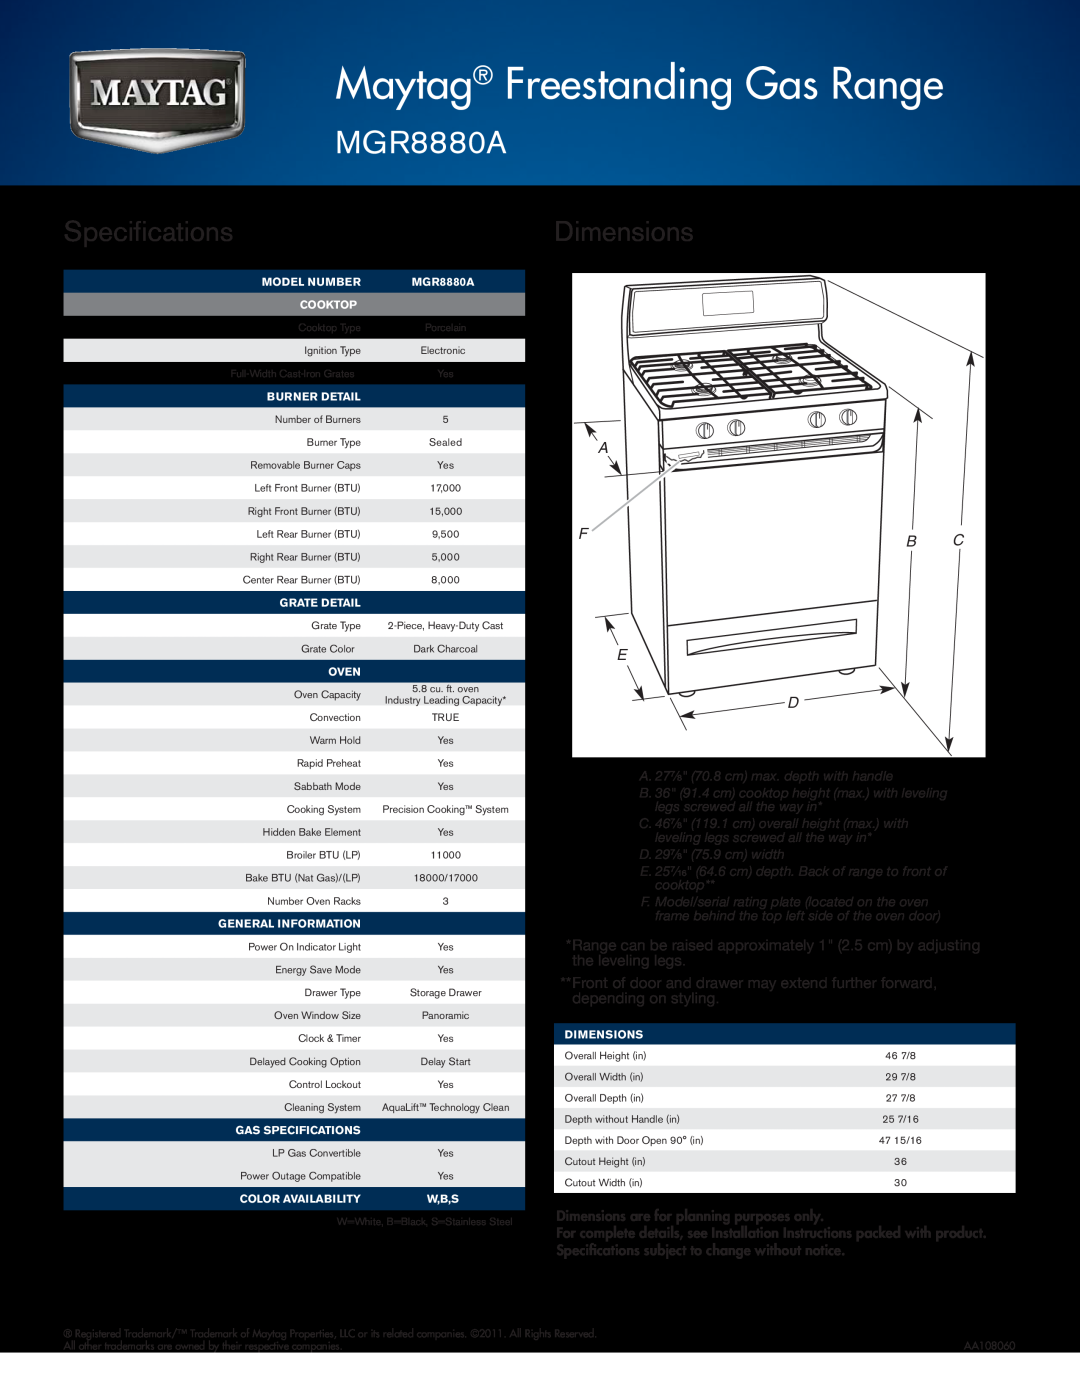 Maytag MGR8880A warranty Specifications, Dimensions, Maytag Freestanding Gas Range, mgr8880a, A Fb C E 